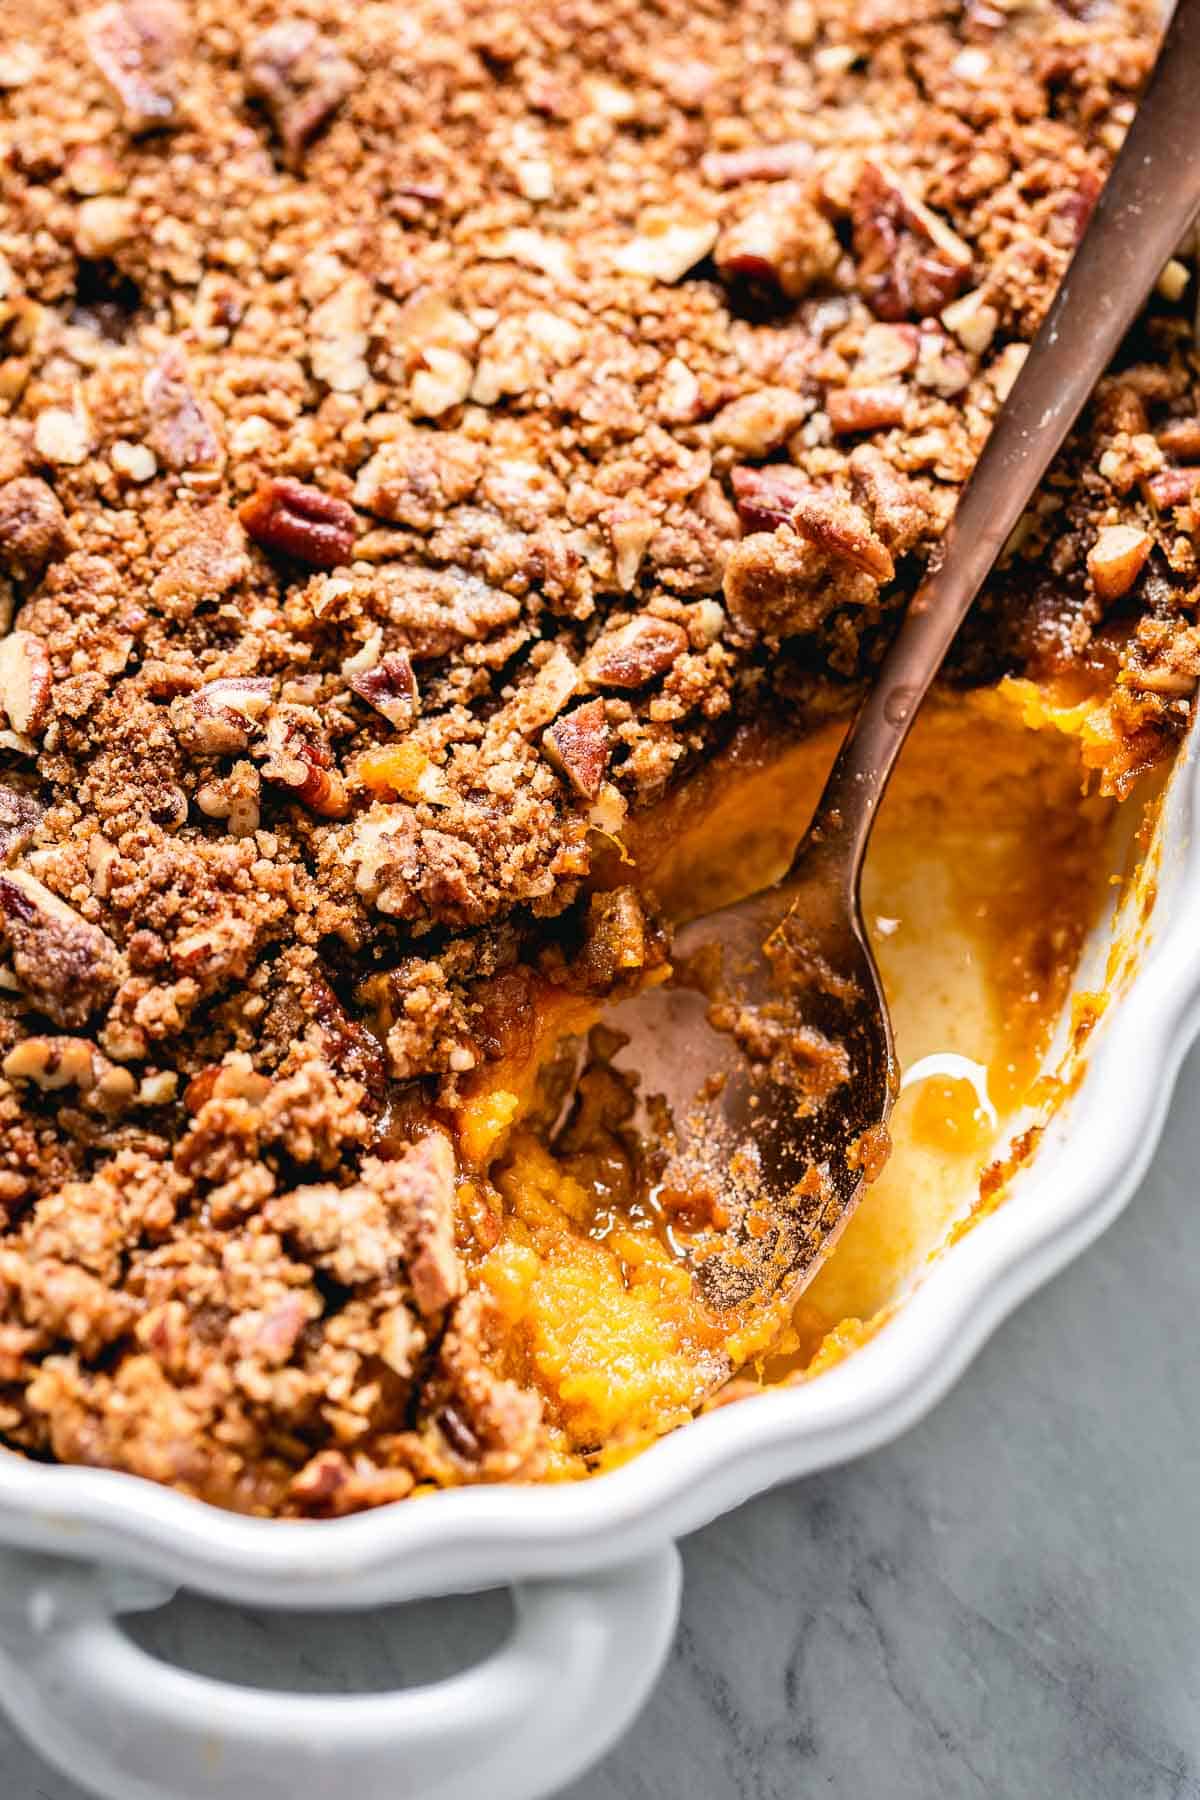 Sweet Potato Casserole with a portion of it taken out